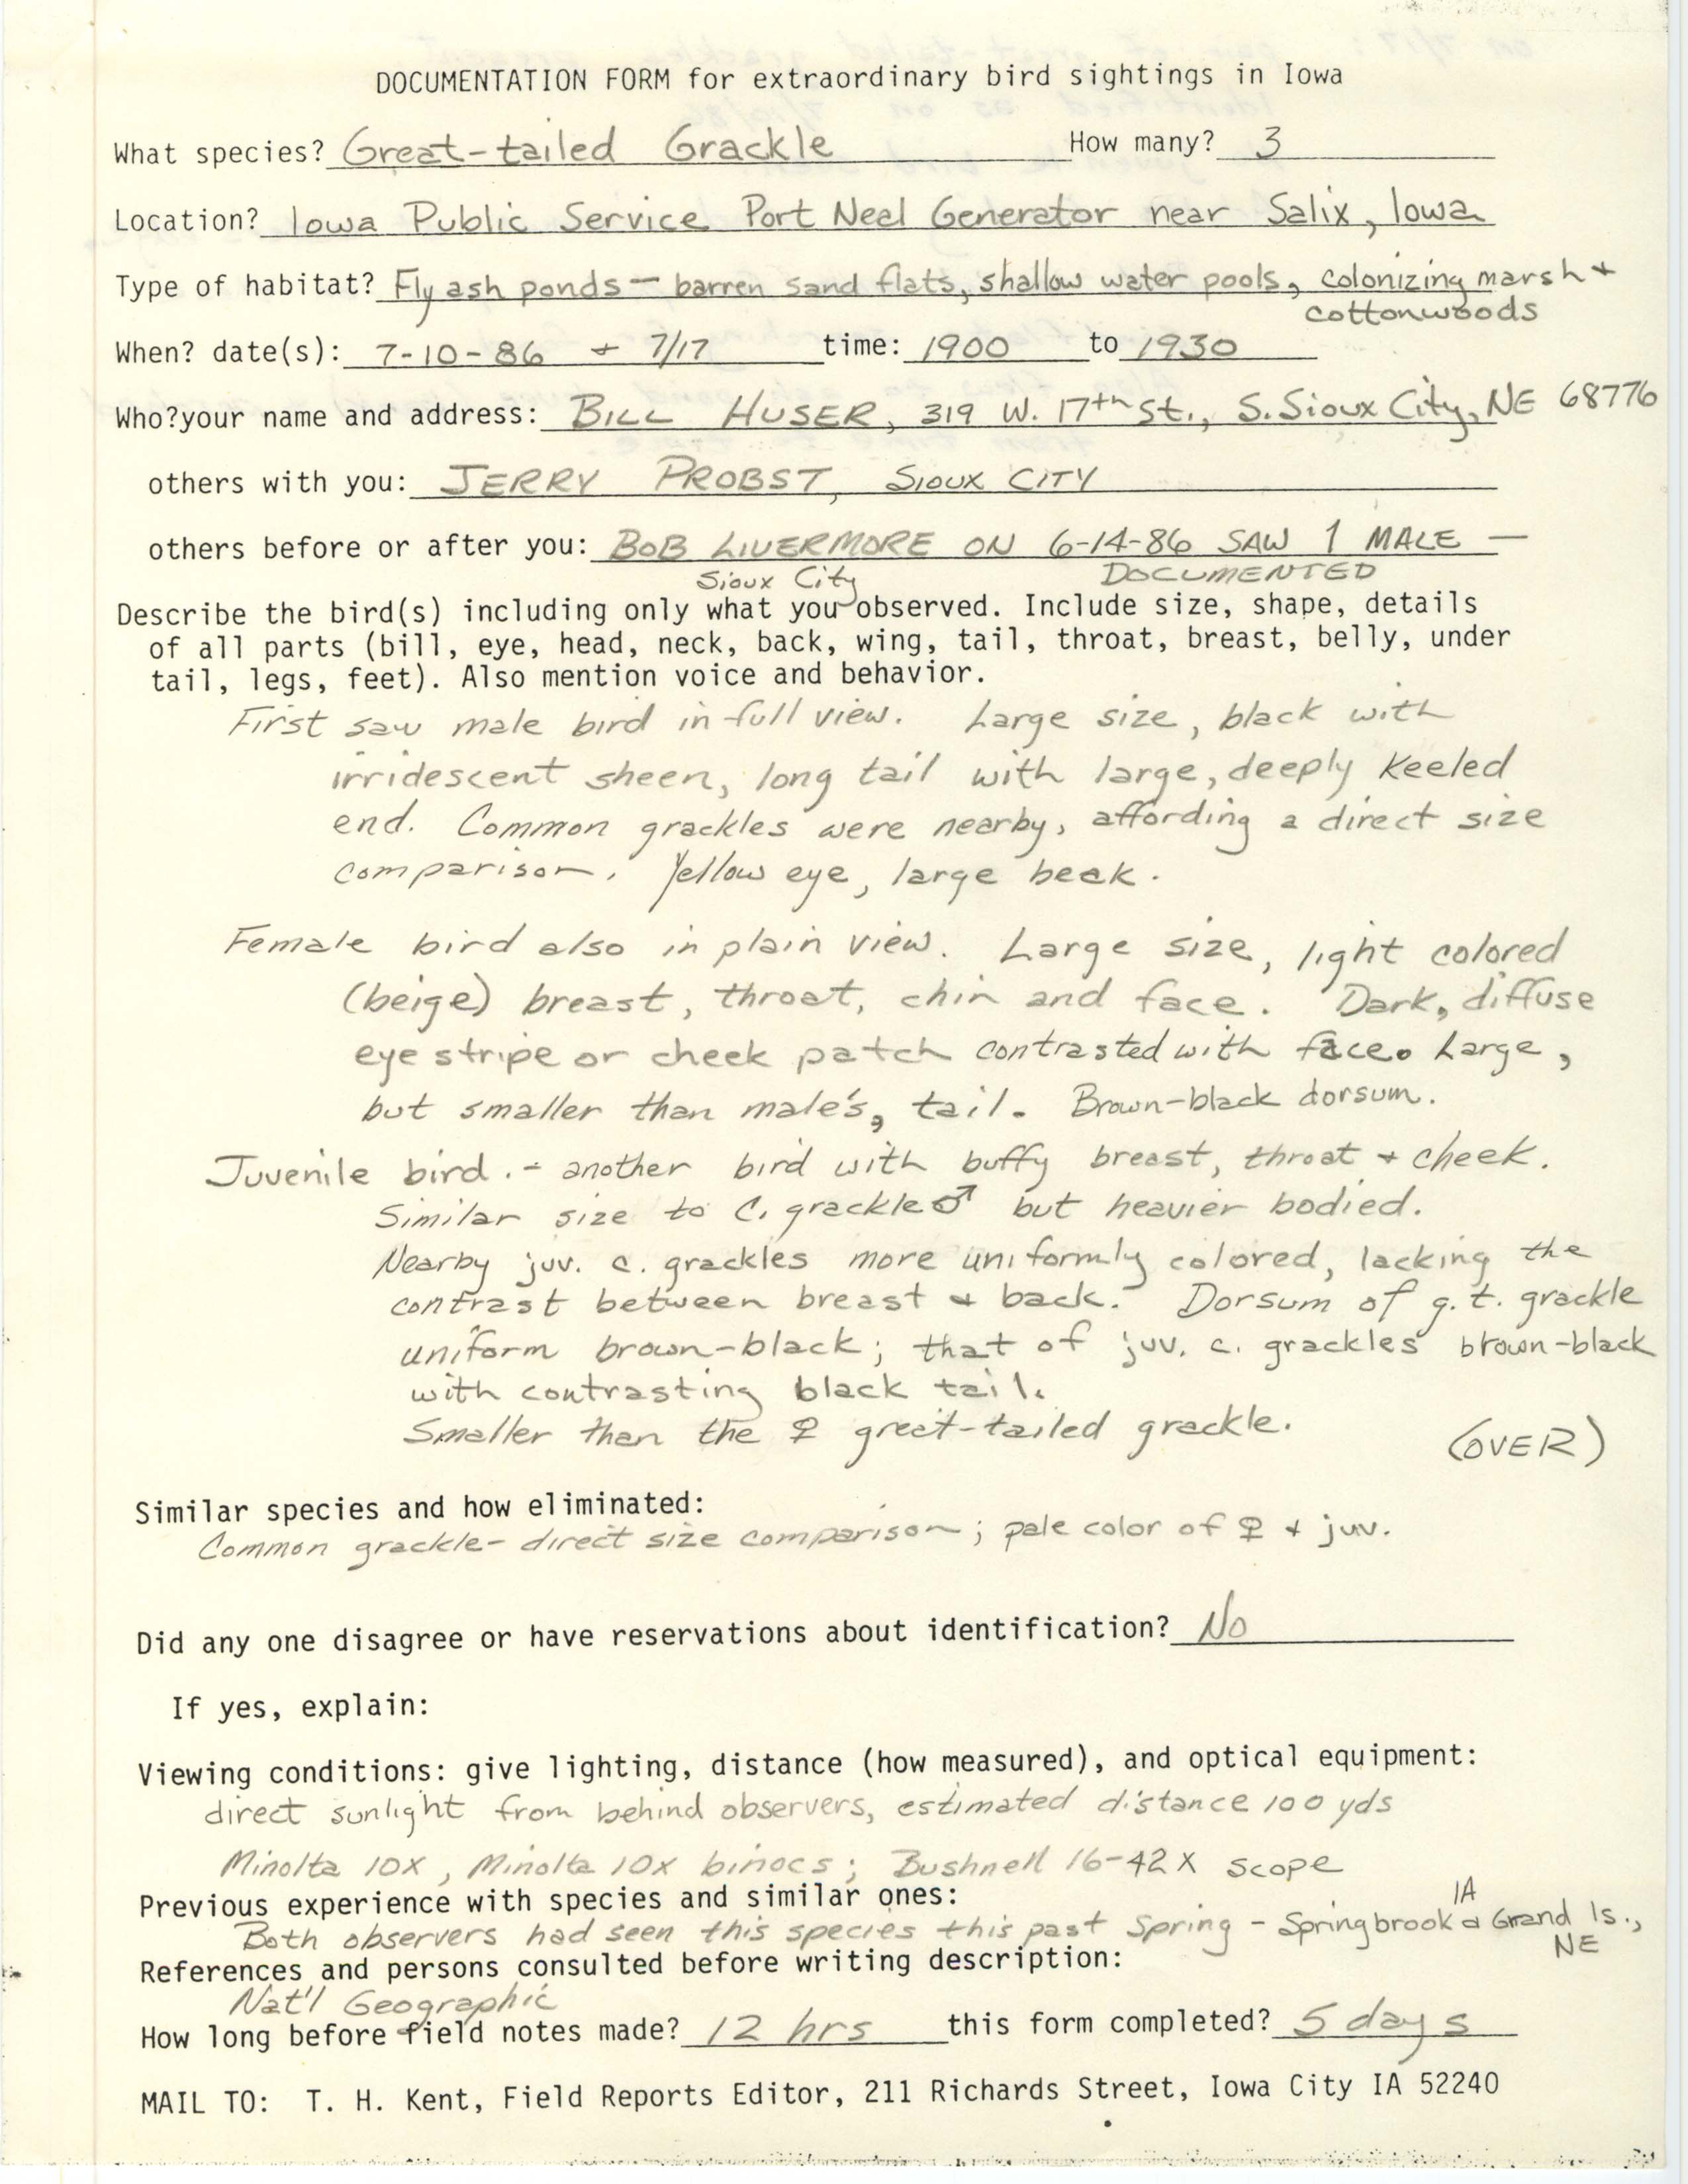 Rare bird documentation form for Great-tailed Grackle at the Port Neal generators near Salix in 1986